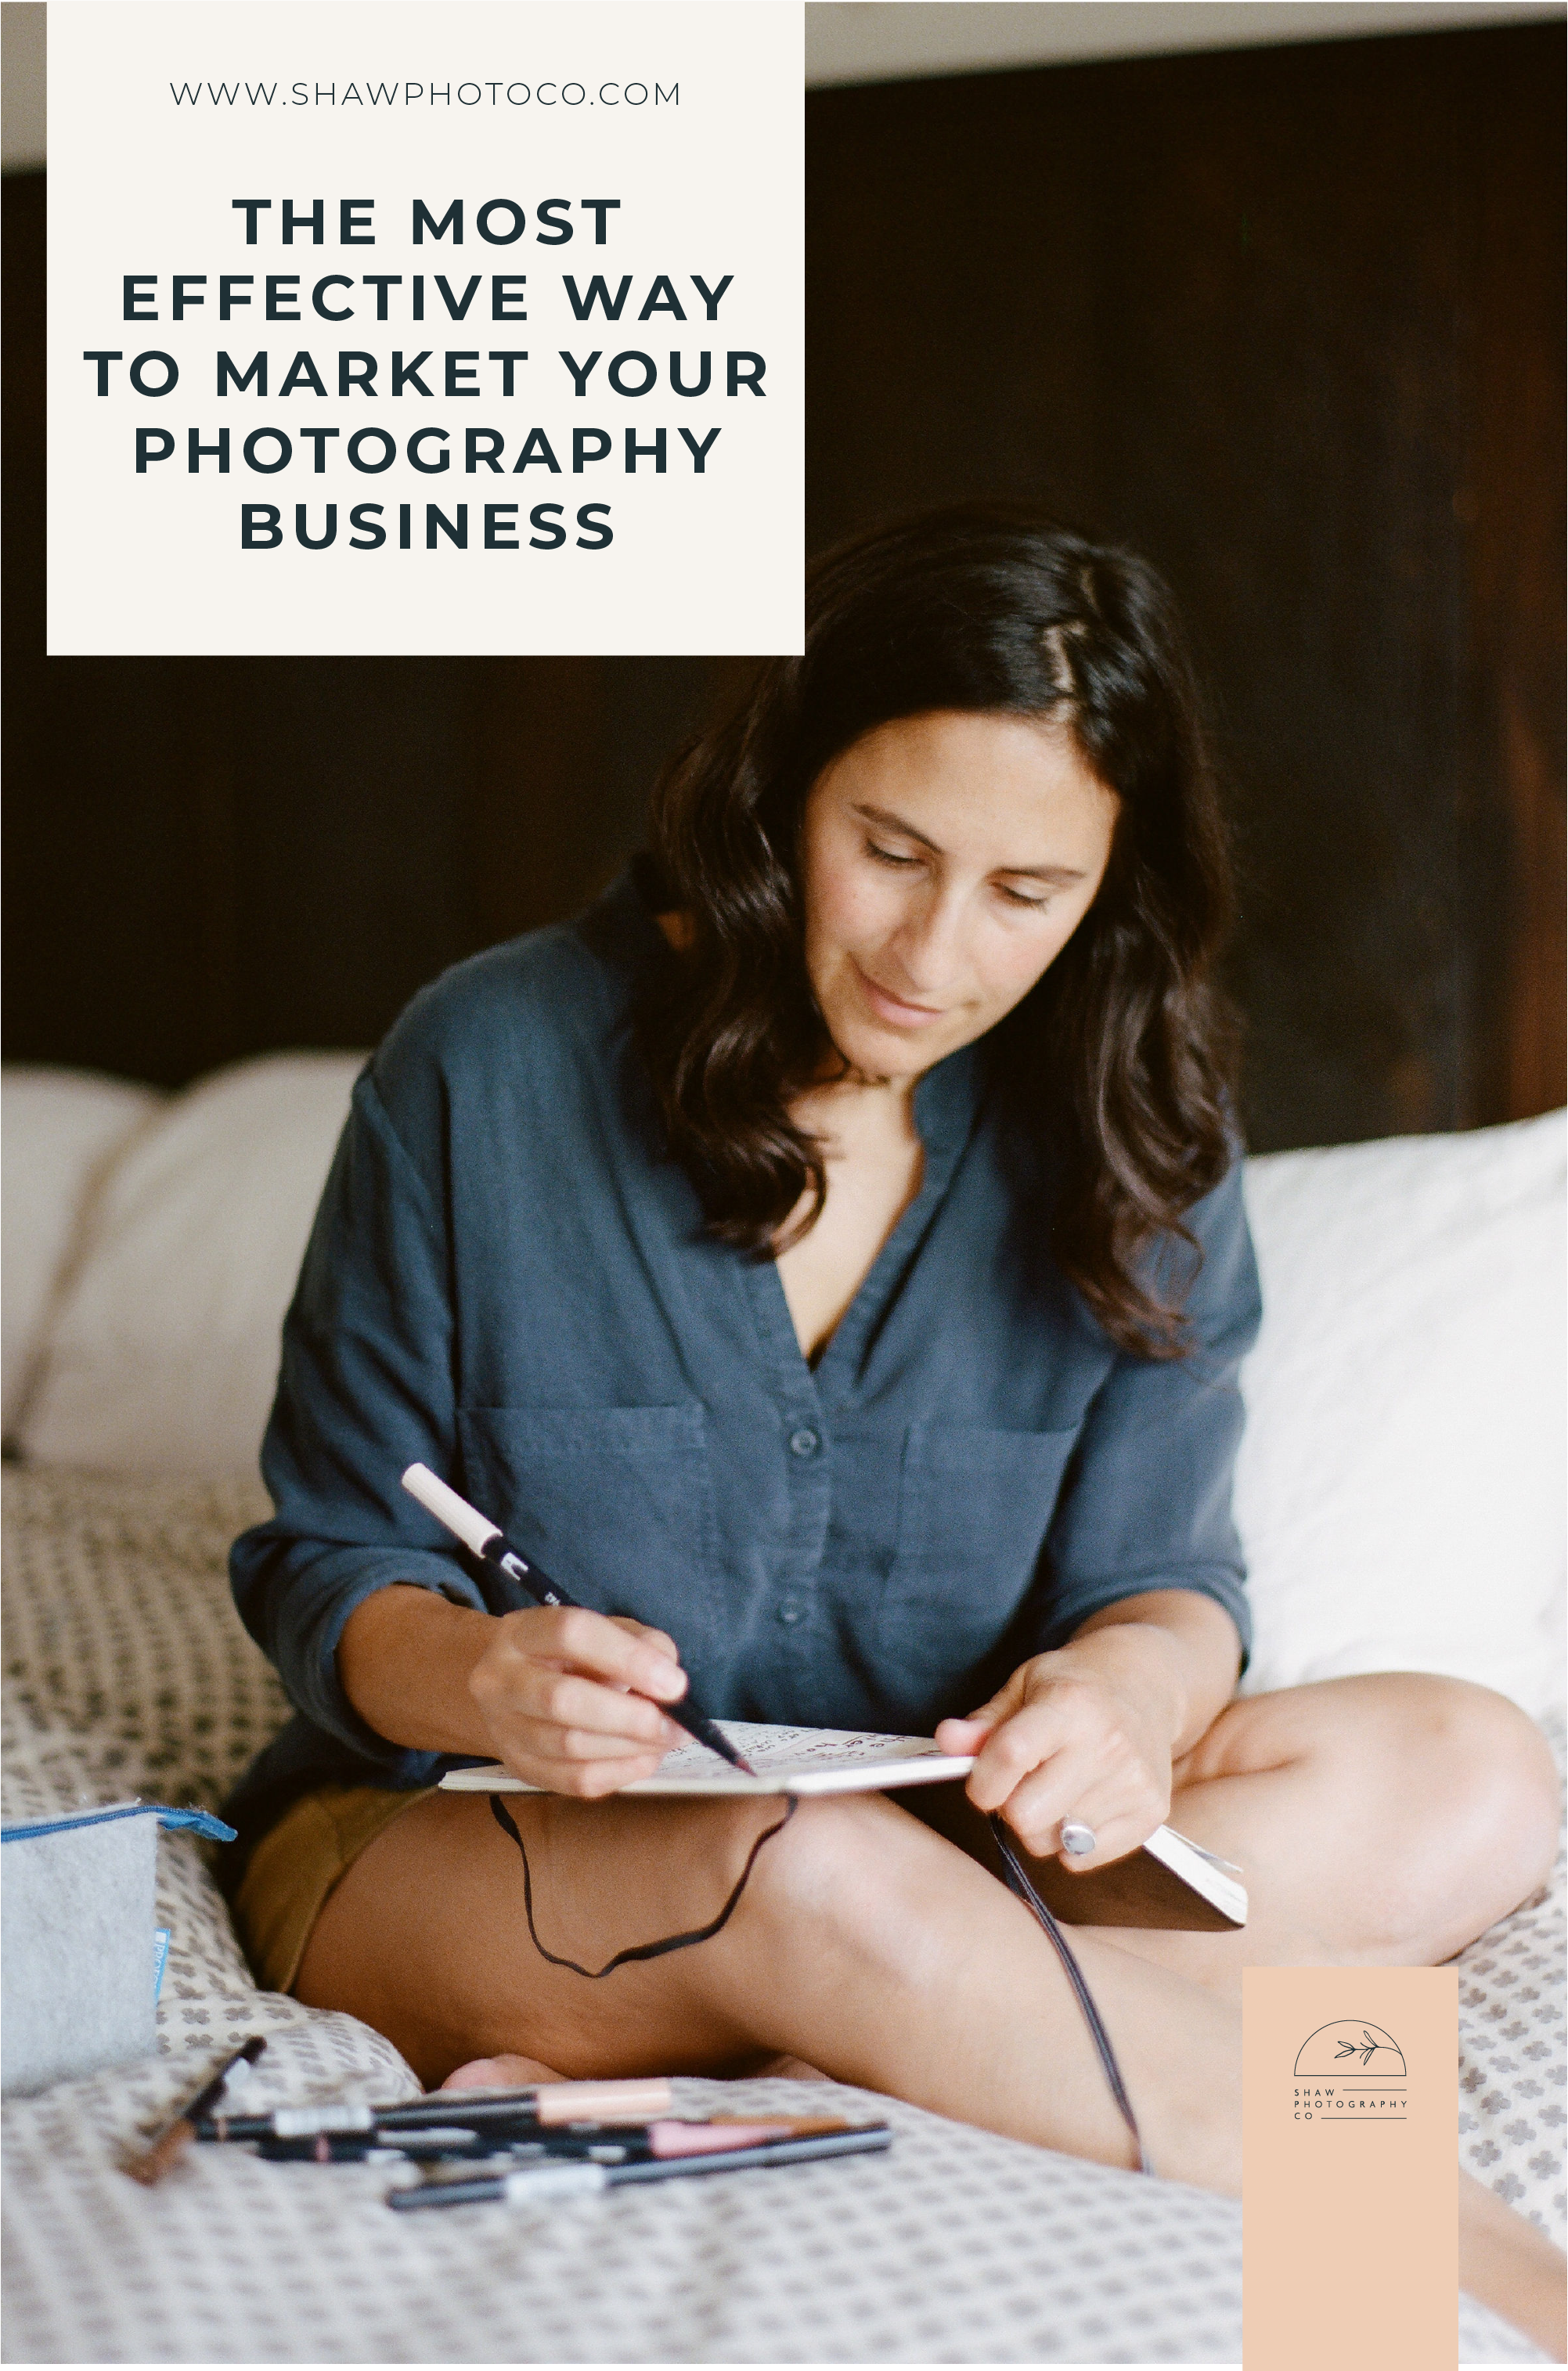 The Most Effective Way to Market Your Photography Business